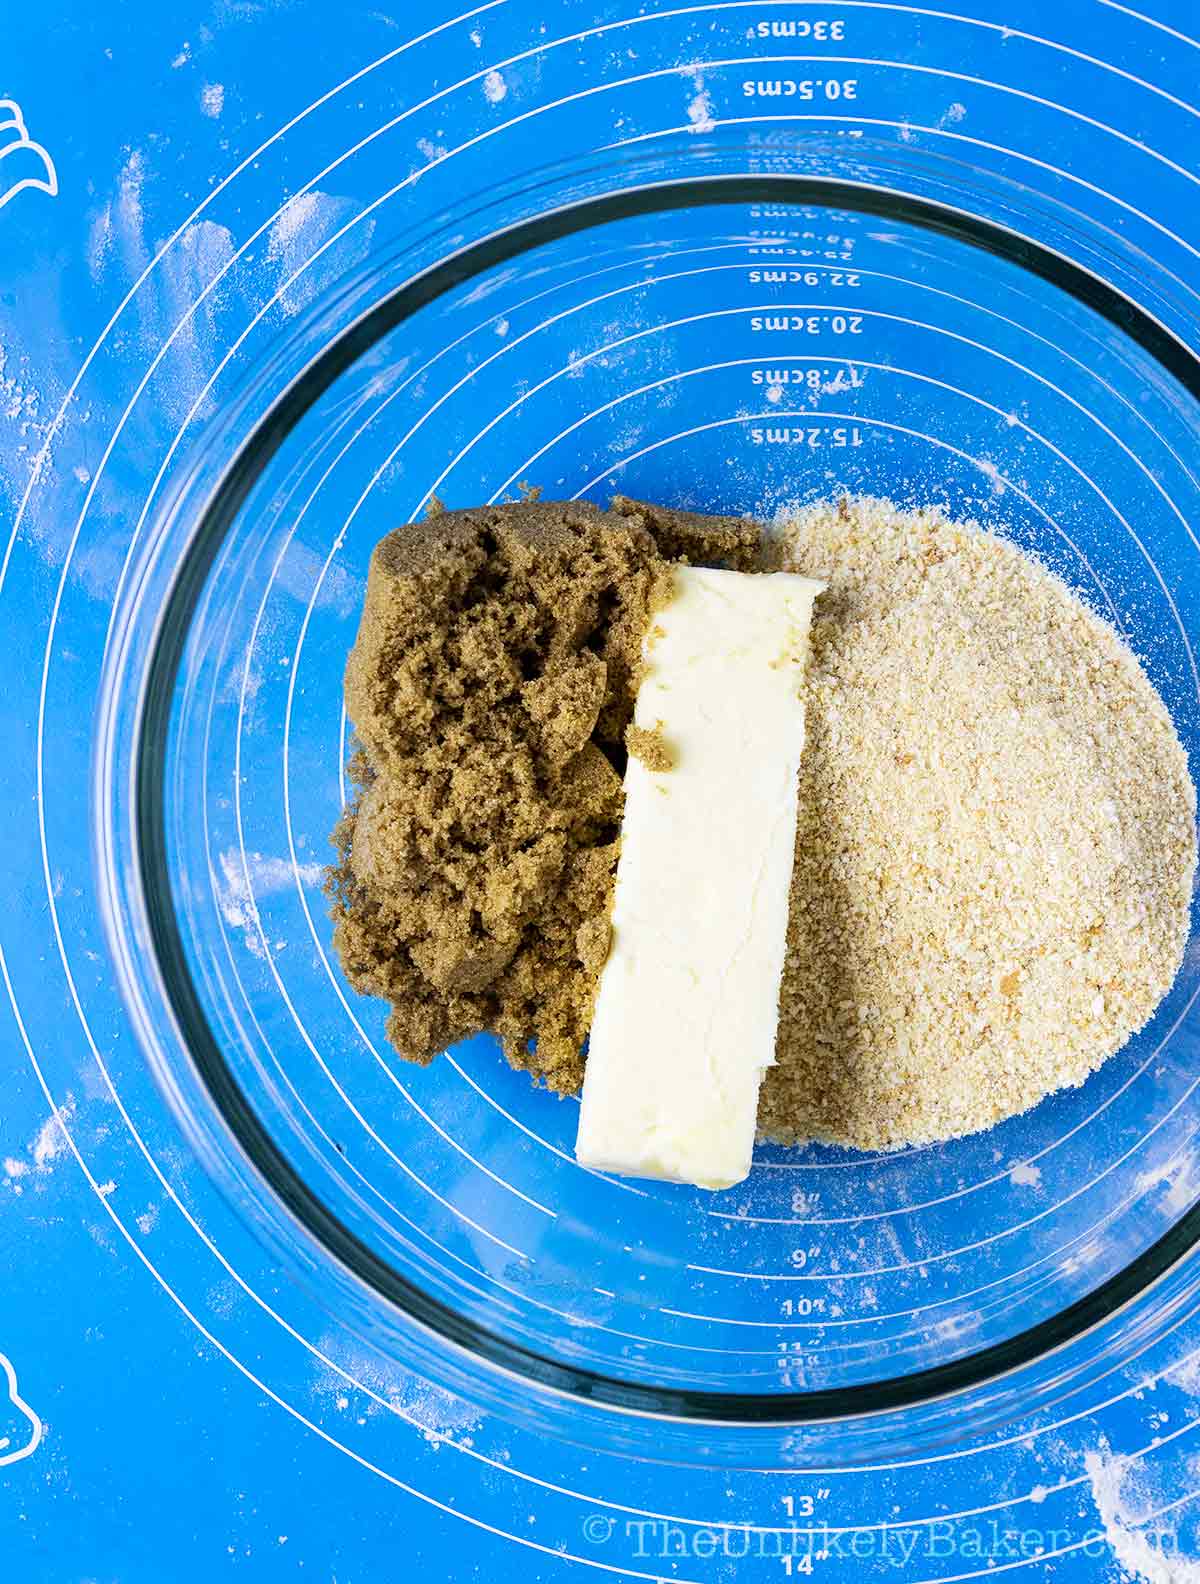 Ingredients for Spanish bread filling in a bowl - butter, breadcrumbs, brown sugar, milk.